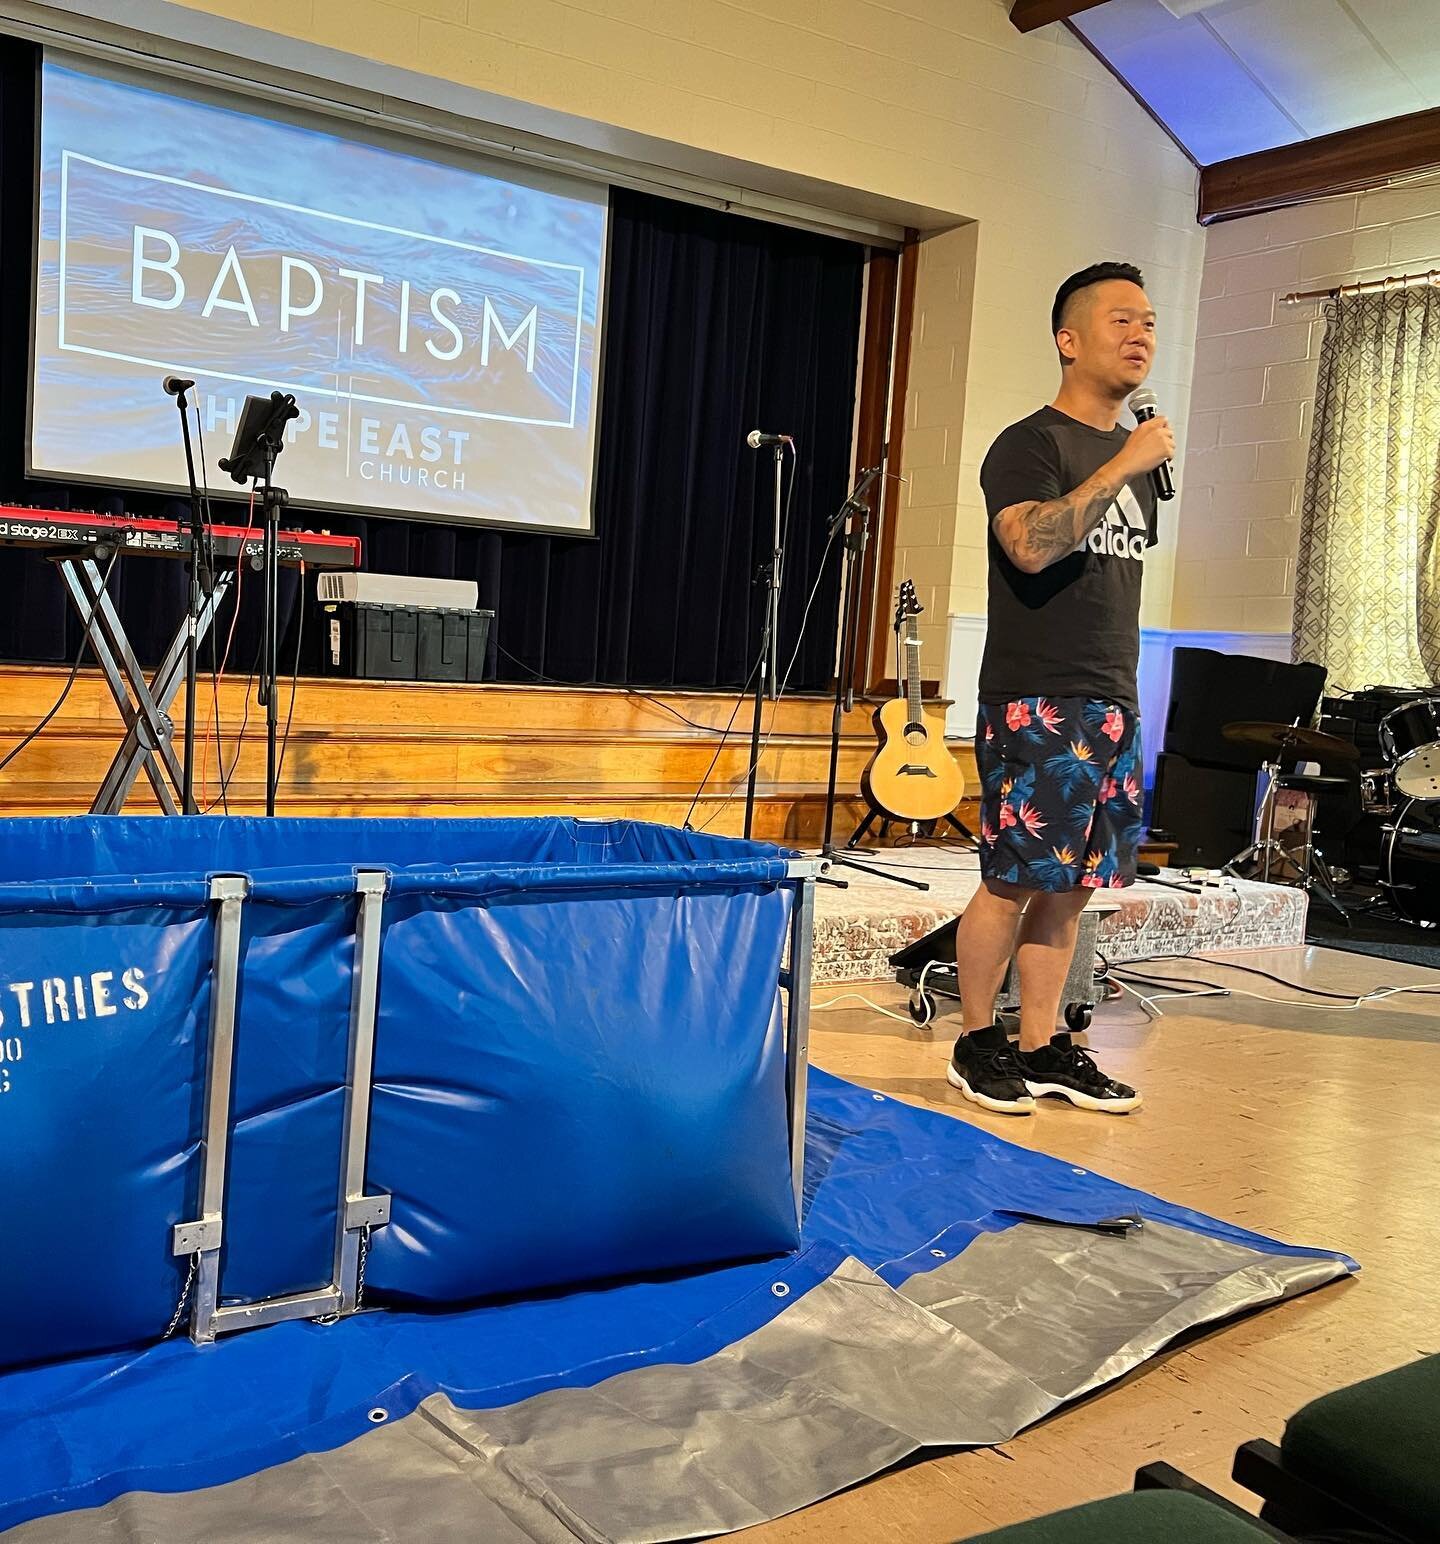 Congrats to our brother Andrew Kim on his baptism Sunday!!